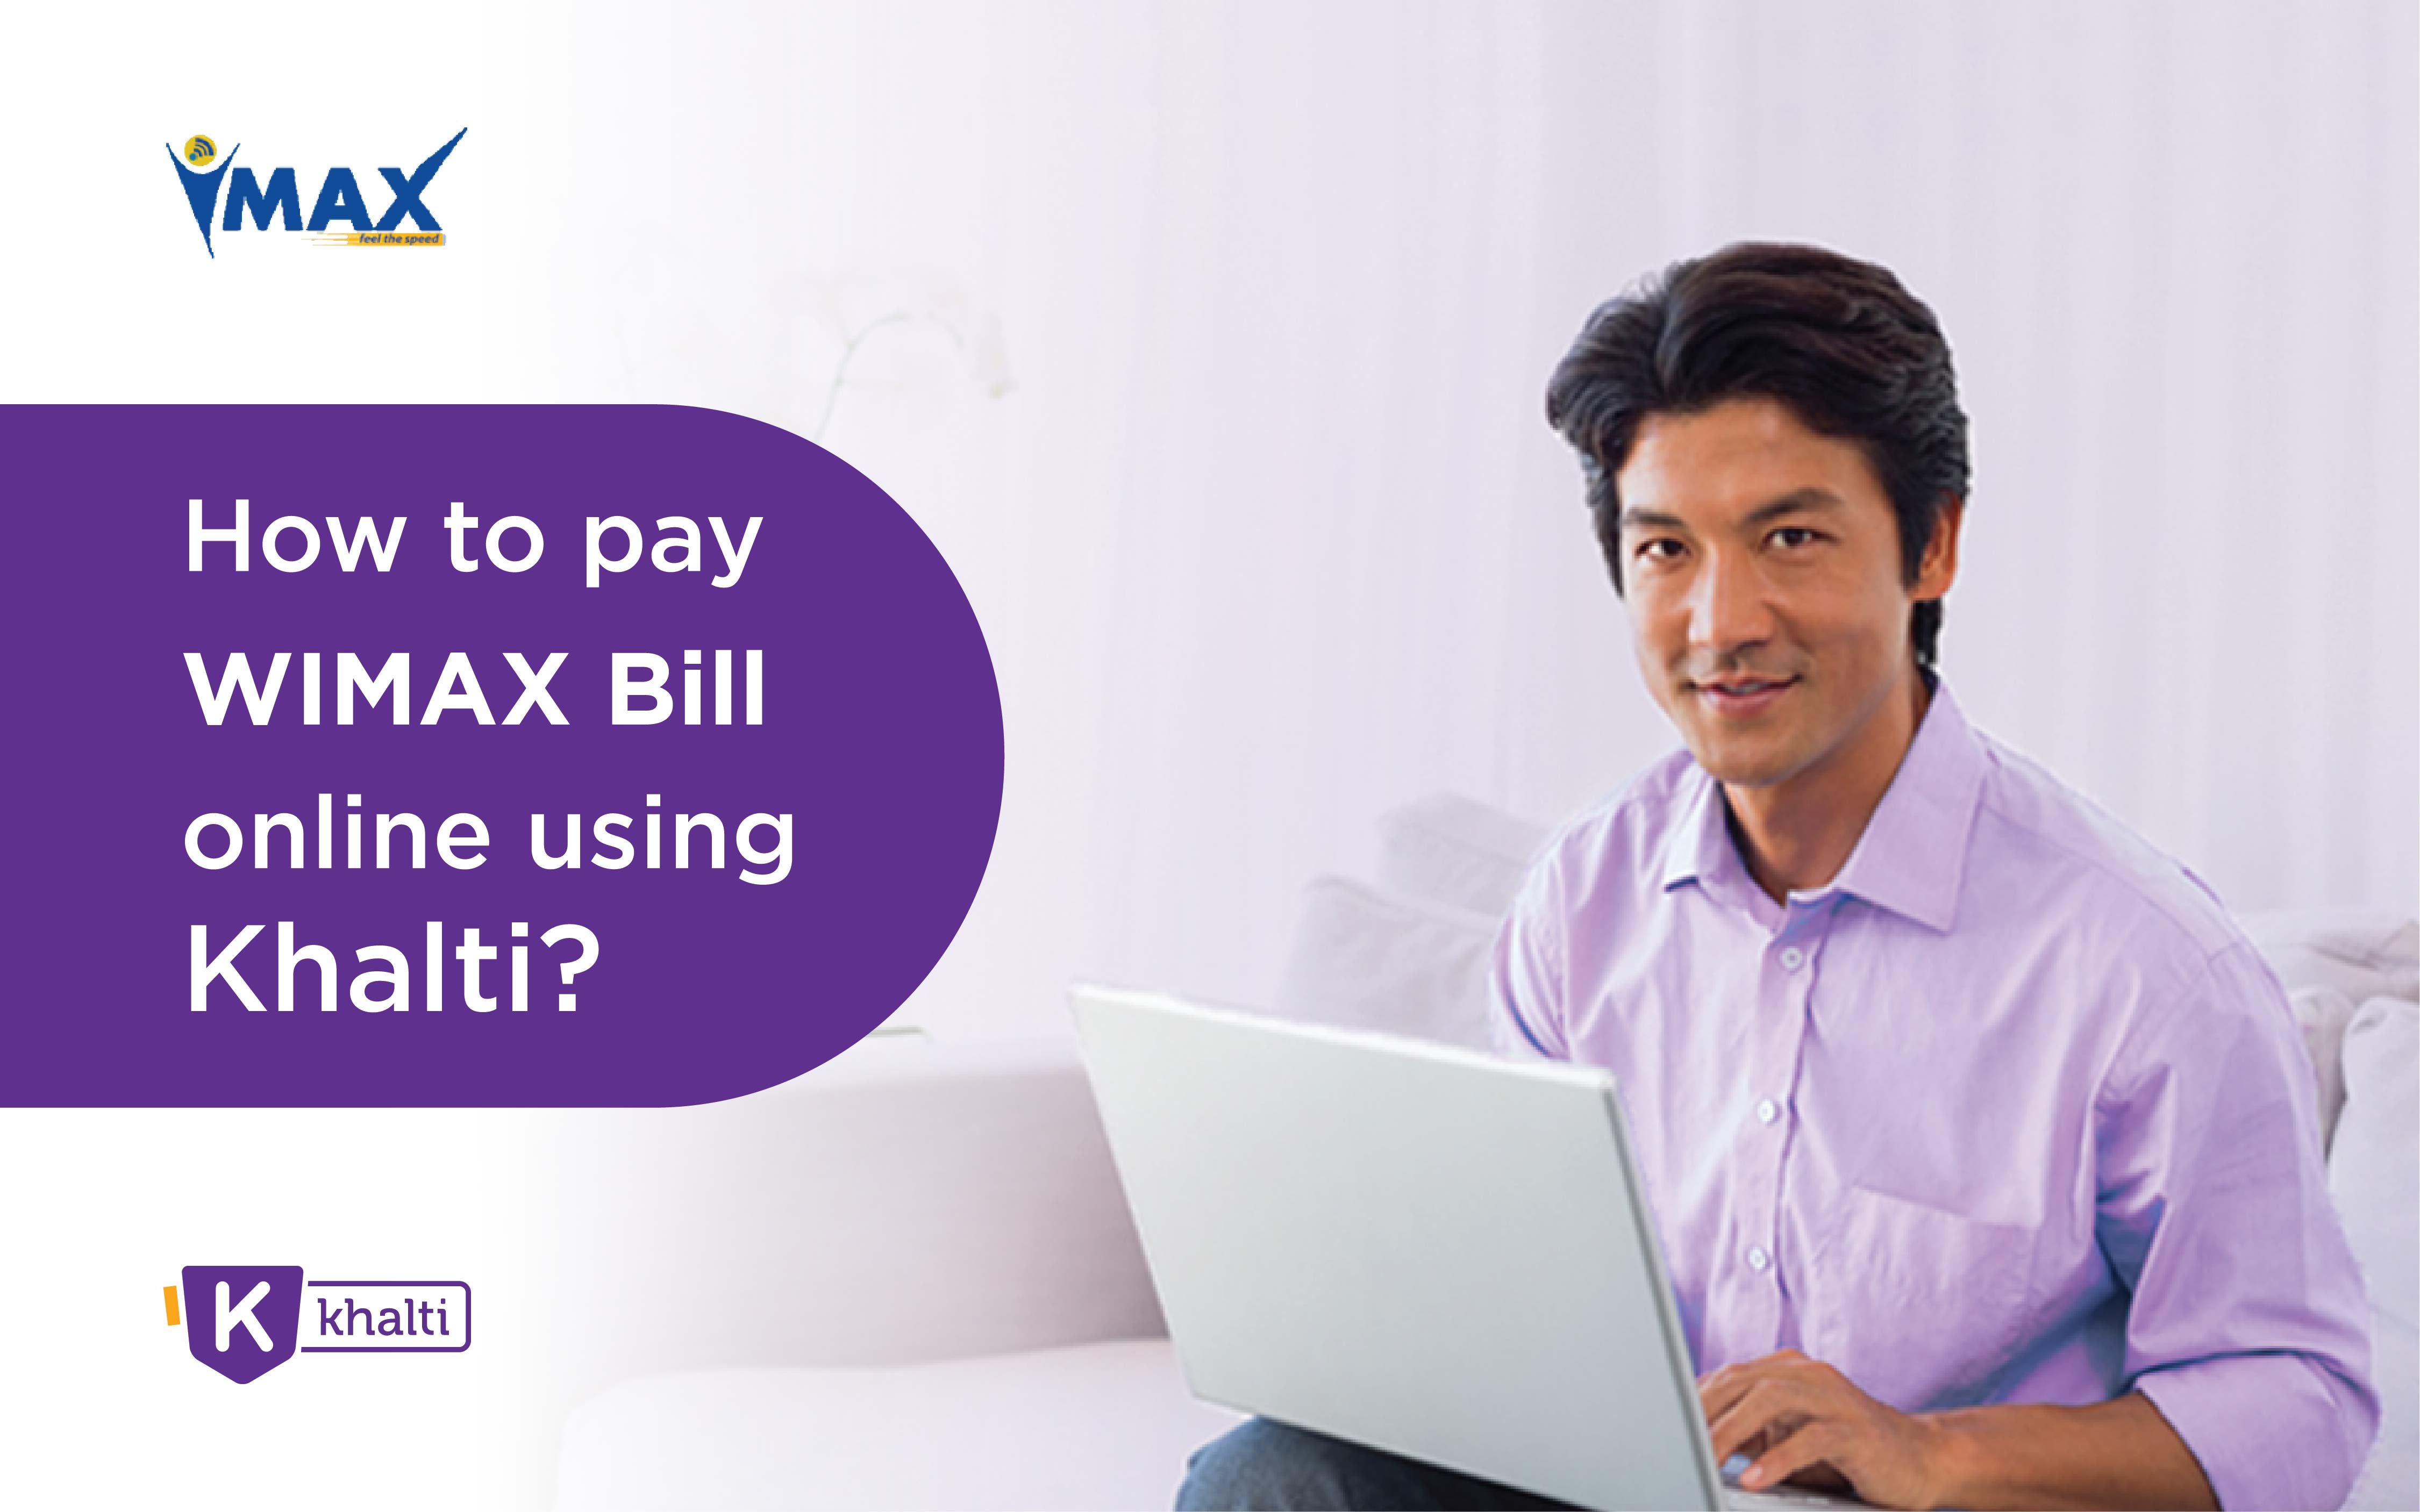 How to pay WIMAX Bill online using Khalti?